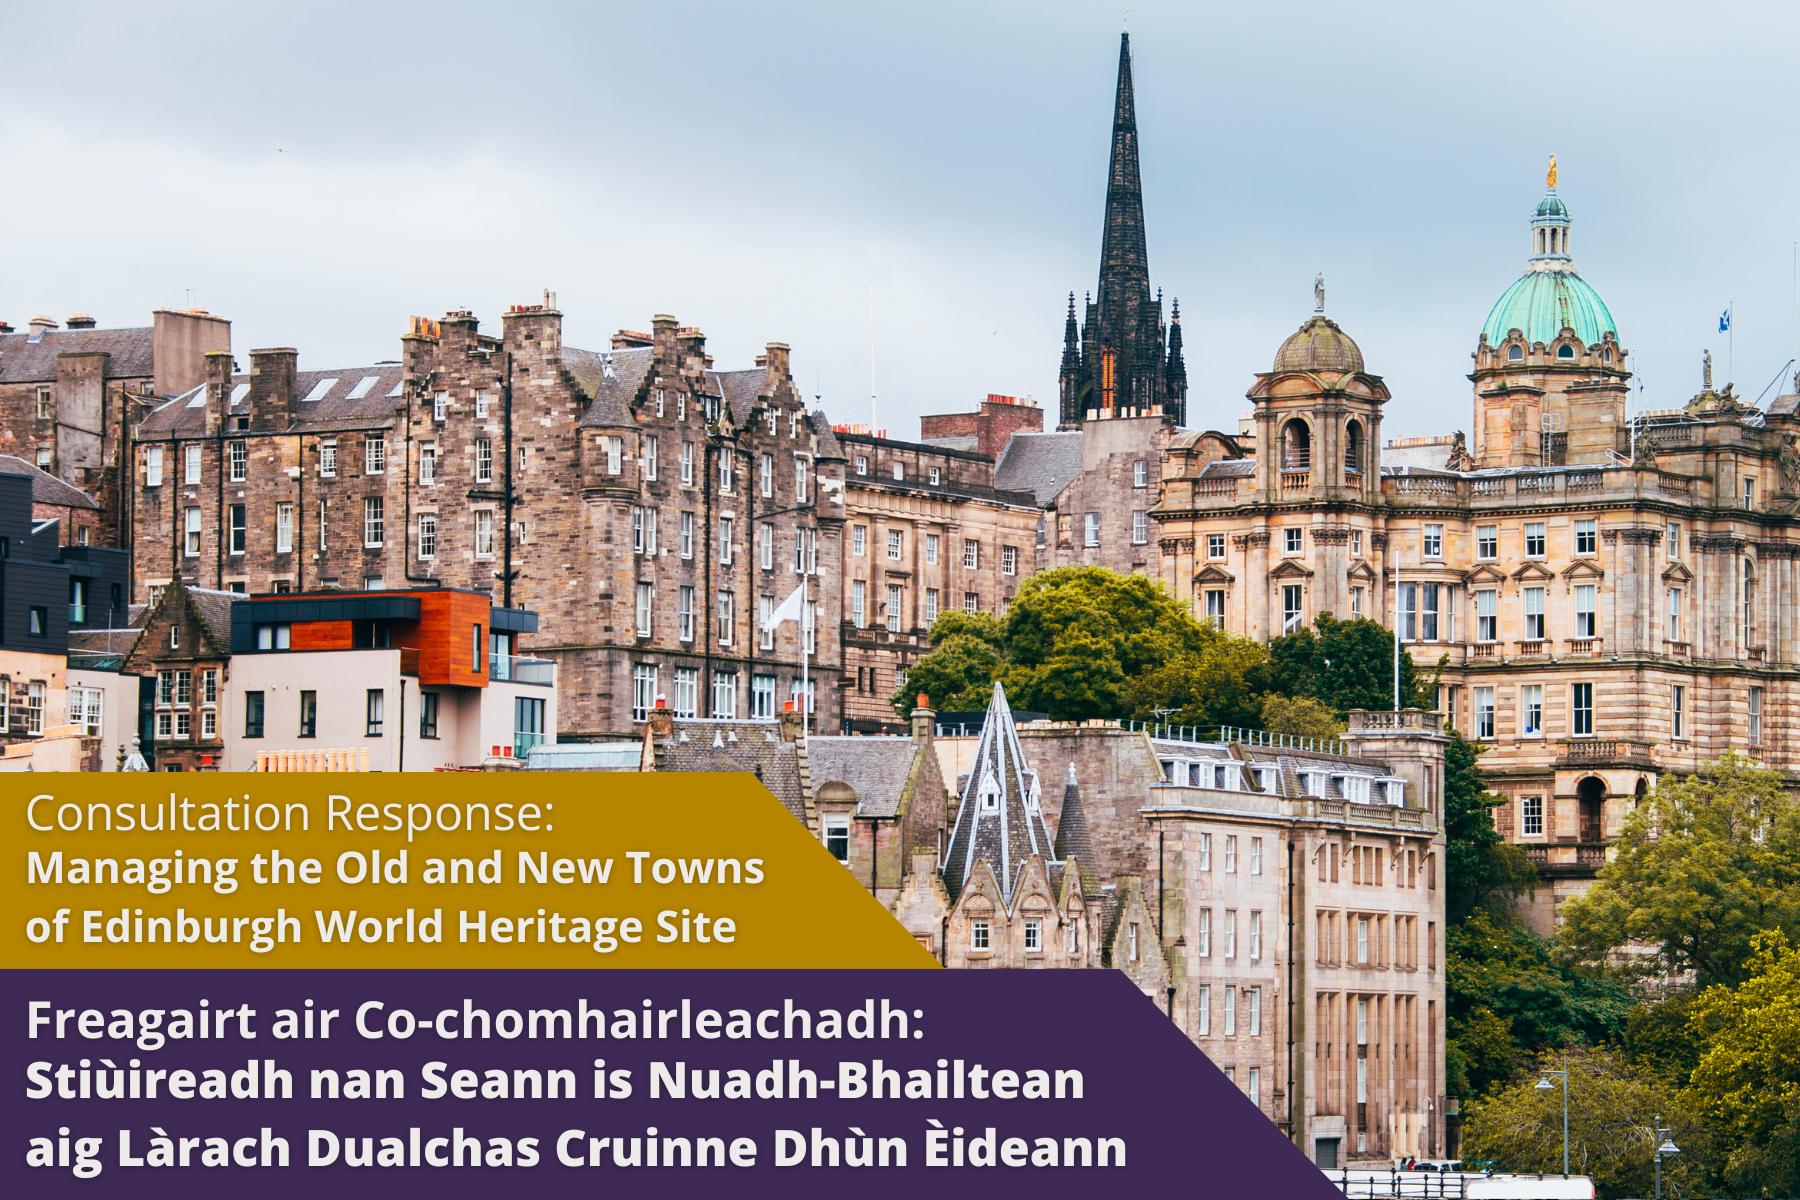 Consultation Response: Managing the Old and New Towns of Edinburgh World Heritage Site